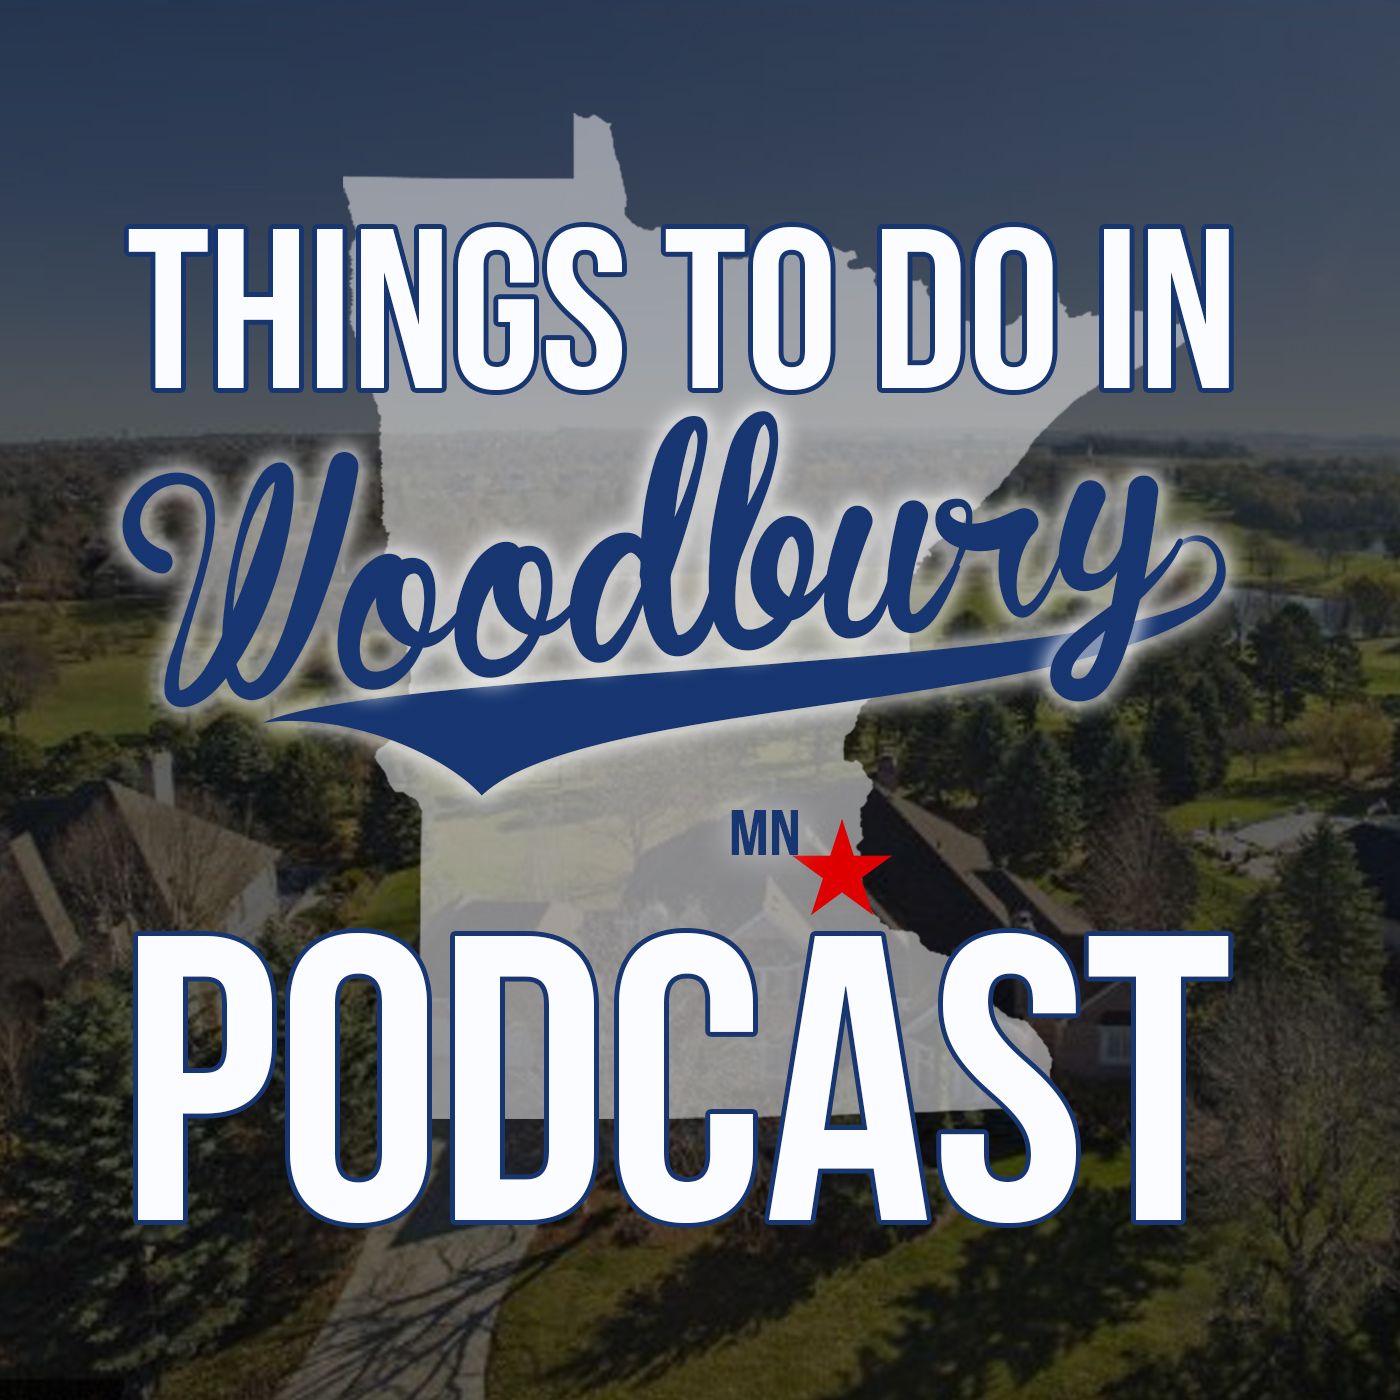 Things To Do in Woodbury MN Podcast